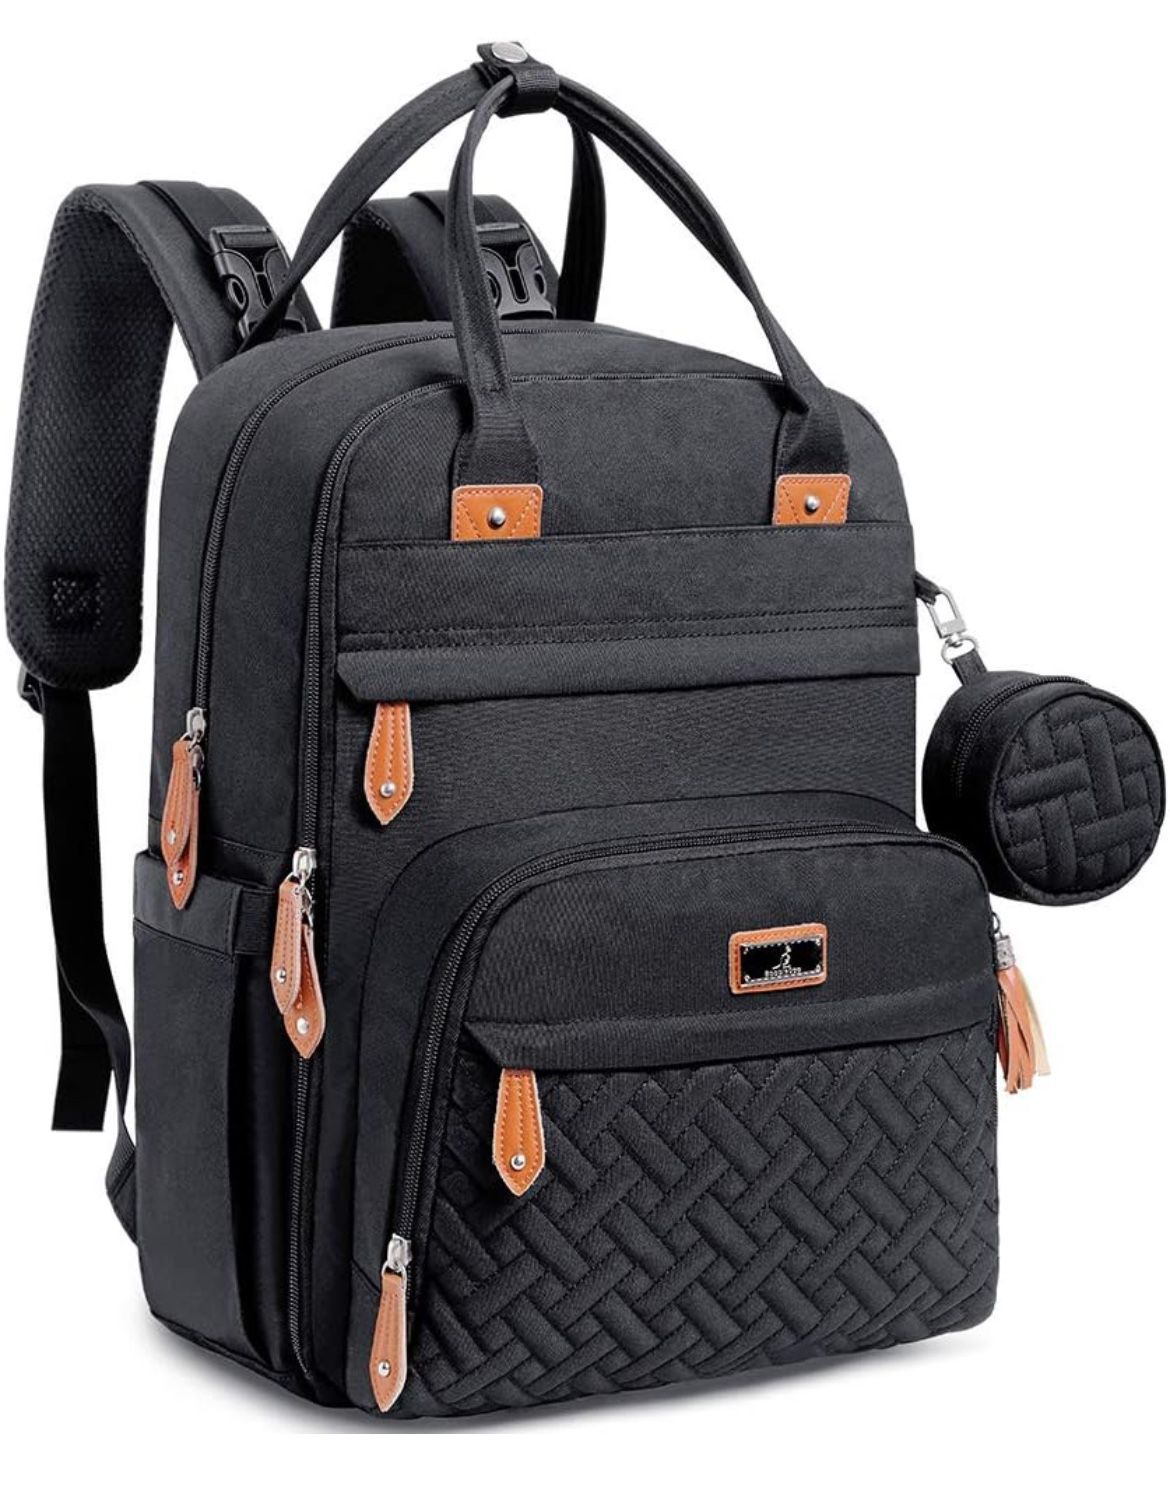 Multifunctional Backpack With Lots Of pockets